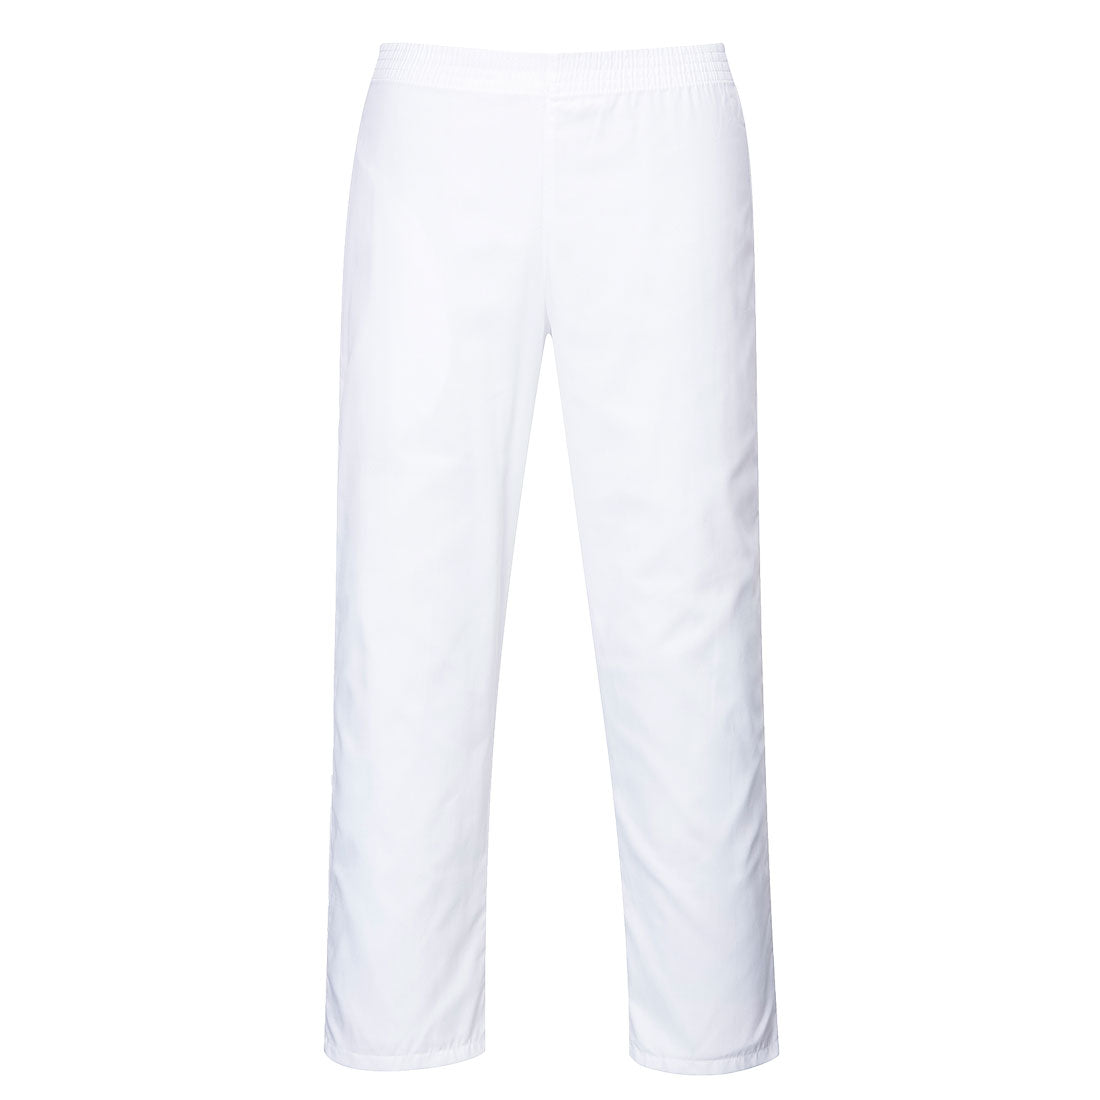 Portwest White Bakers Trousers - 2208